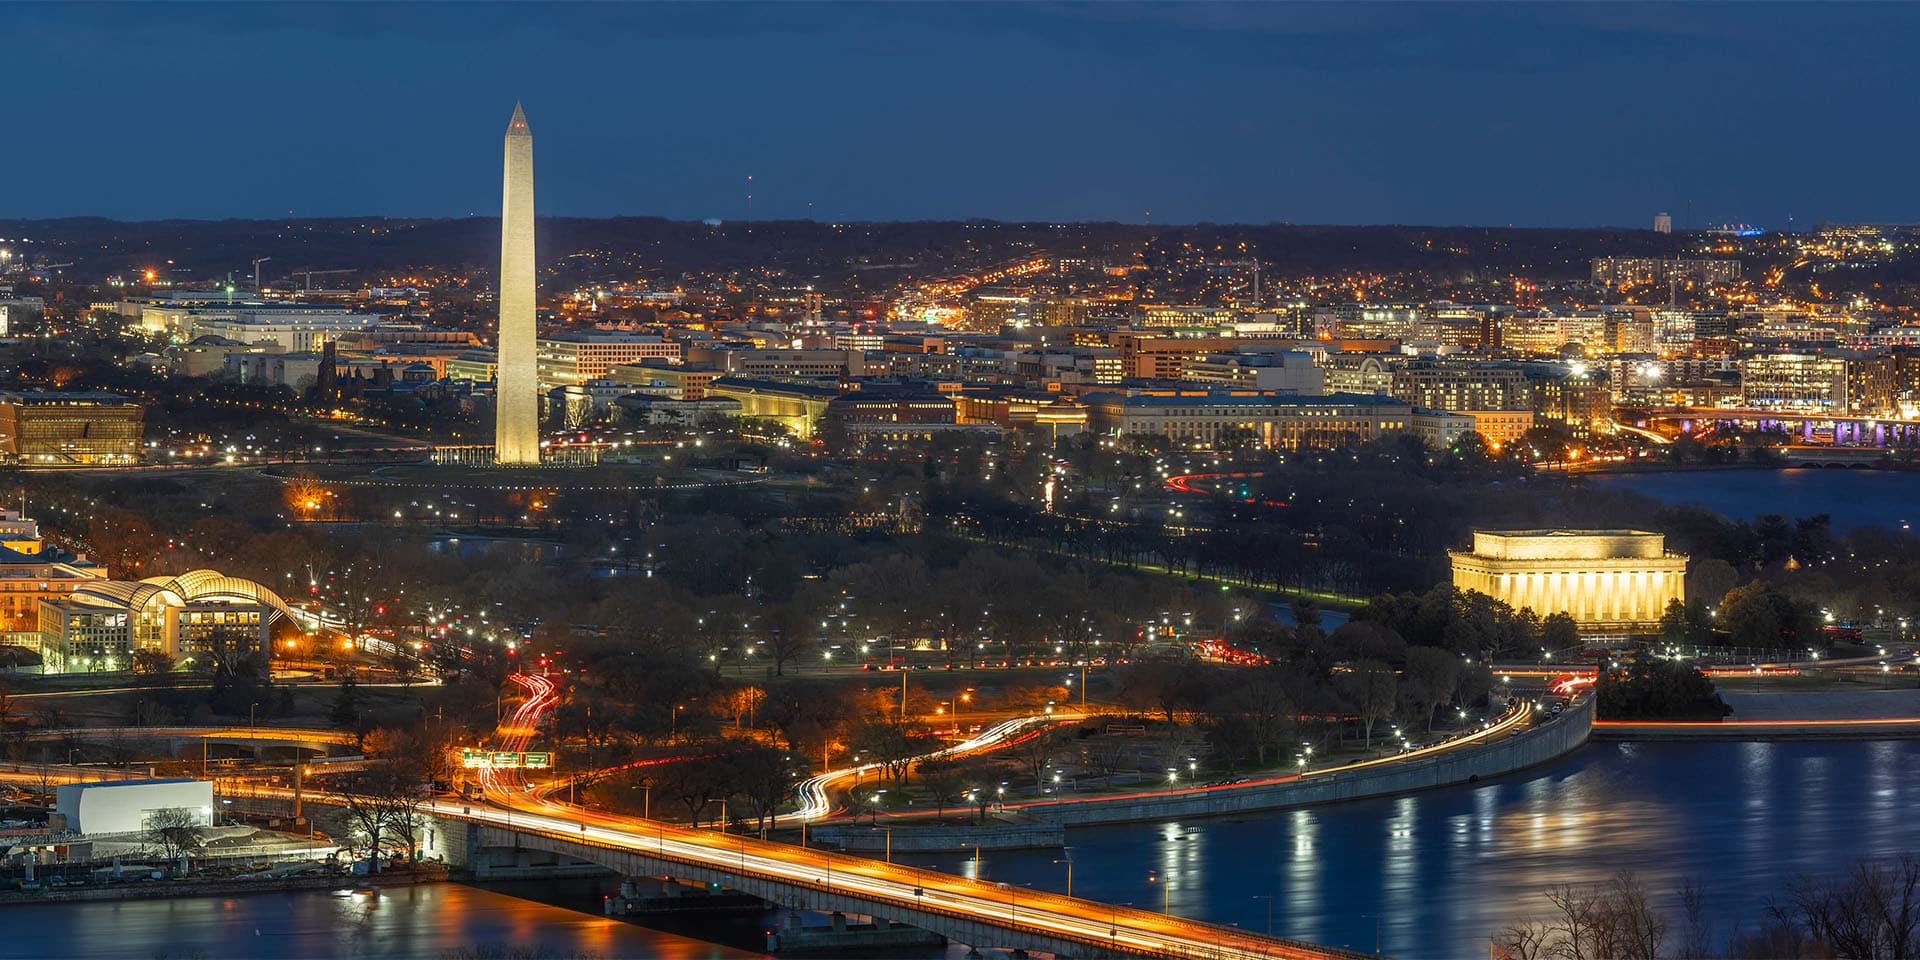 A nighttime aerial view of Washington, D.C., featuring the illuminated Washington Monument and the Lincoln Memorial. The city's buildings and streets are lit up, with traffic visible on the roads and bridges spanning the Potomac River.